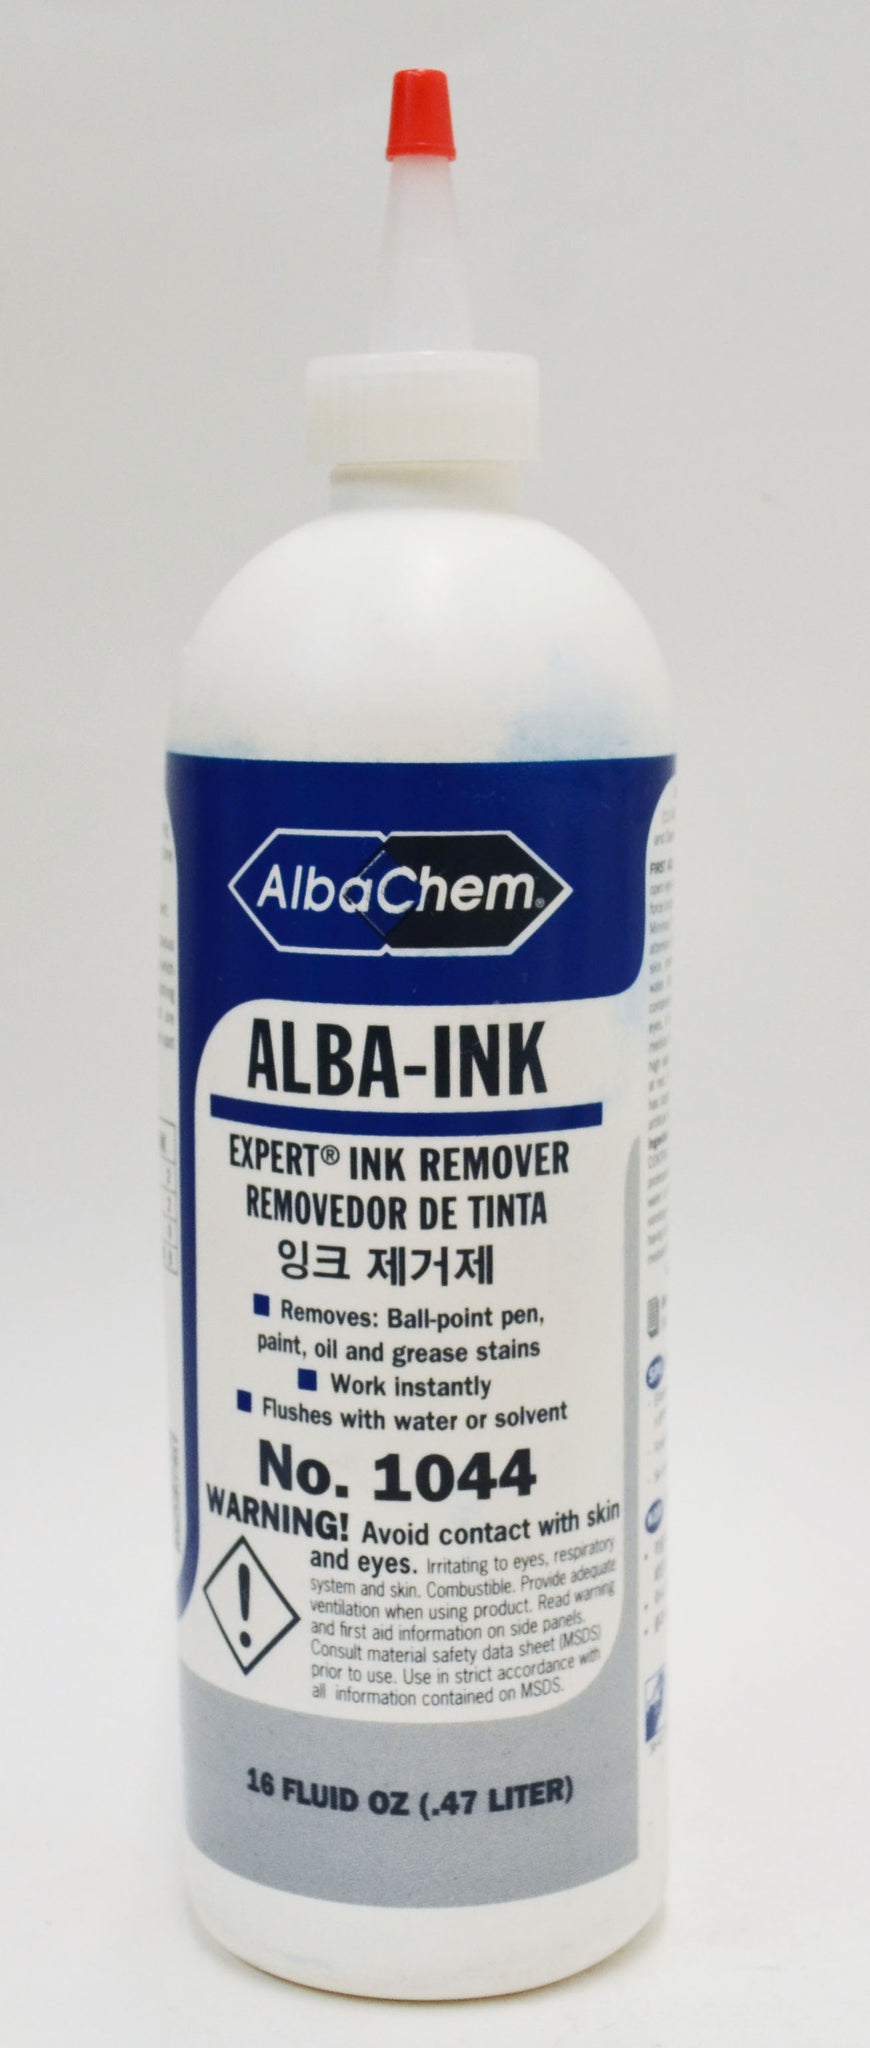 Alba-Ink Expert Ink Remover – Panda Int'l Trading of NY, Inc